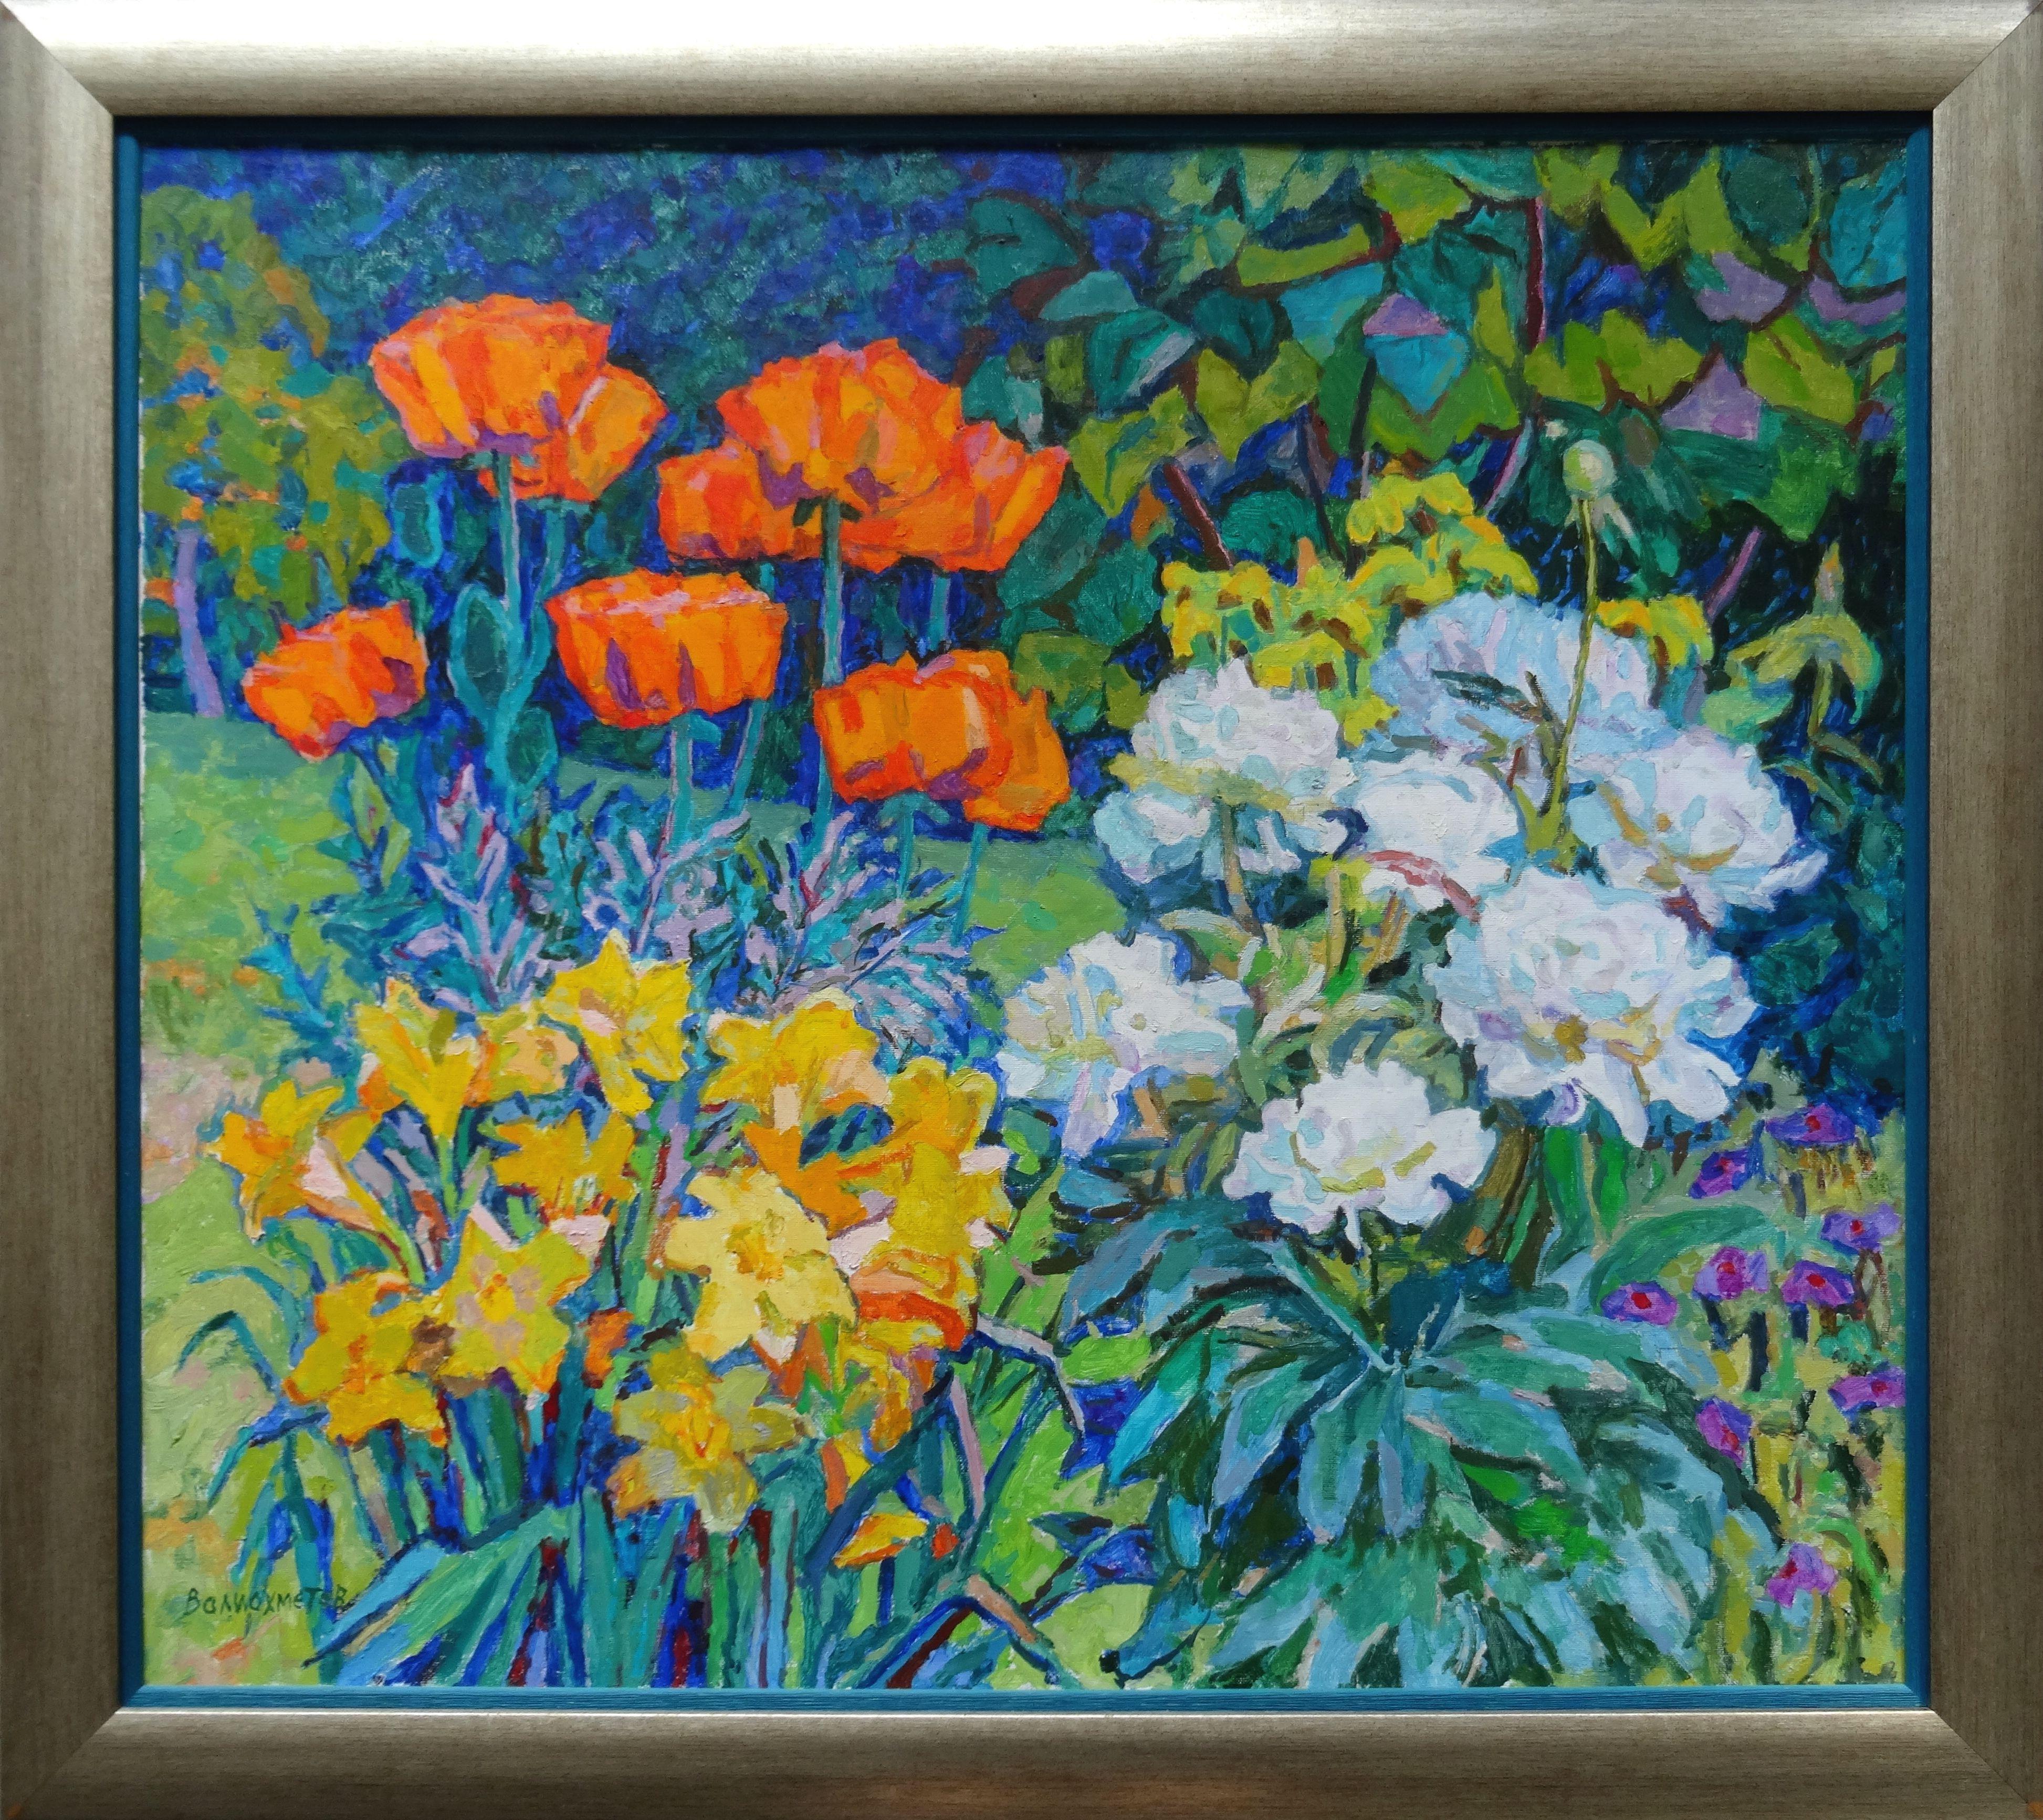 Poppies and peonies. 1985. Oil on canvas, 70x80 cm - Painting by Valiahmetov Amir Hasnulovitch